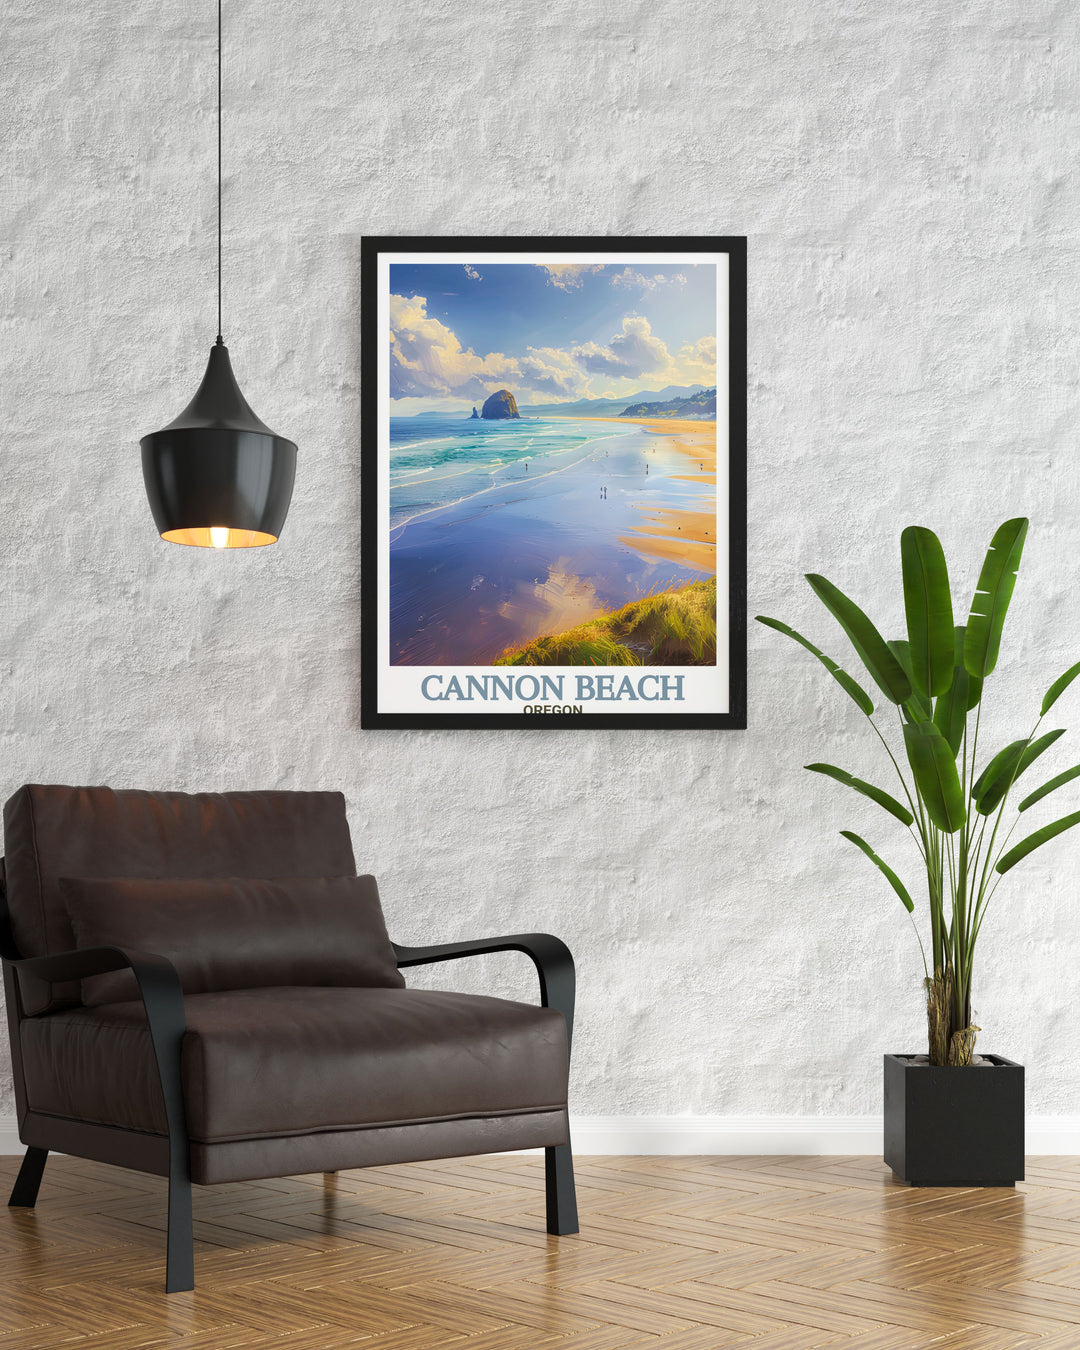 Cannon Beach travel poster capturing the picturesque scenery of the coastal town ideal for those who love to travel and appreciate fine art prints and city maps